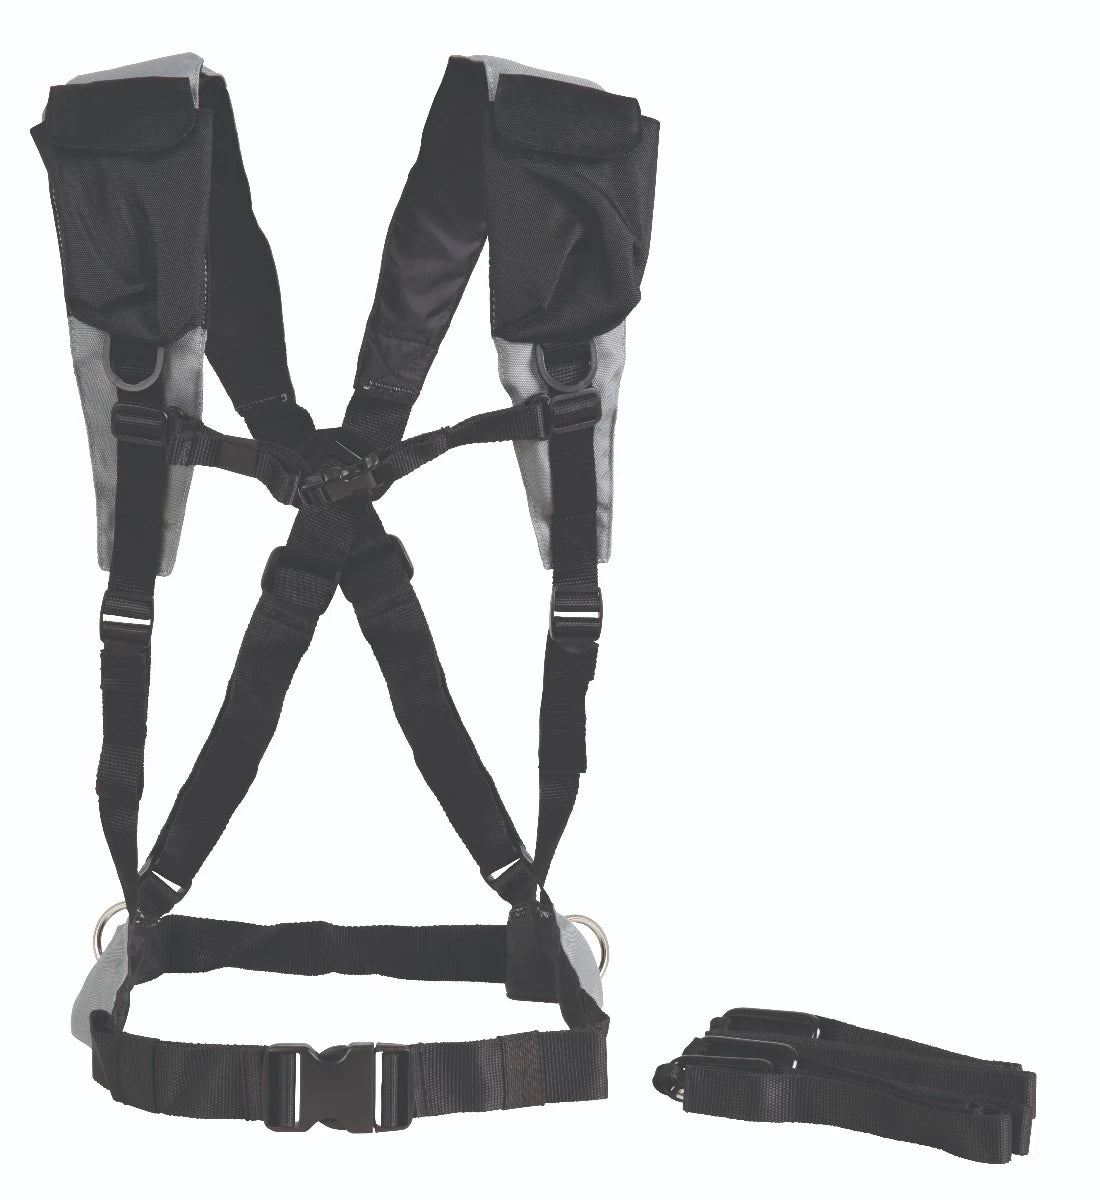 Clam 8427 Sled Pulling Harness